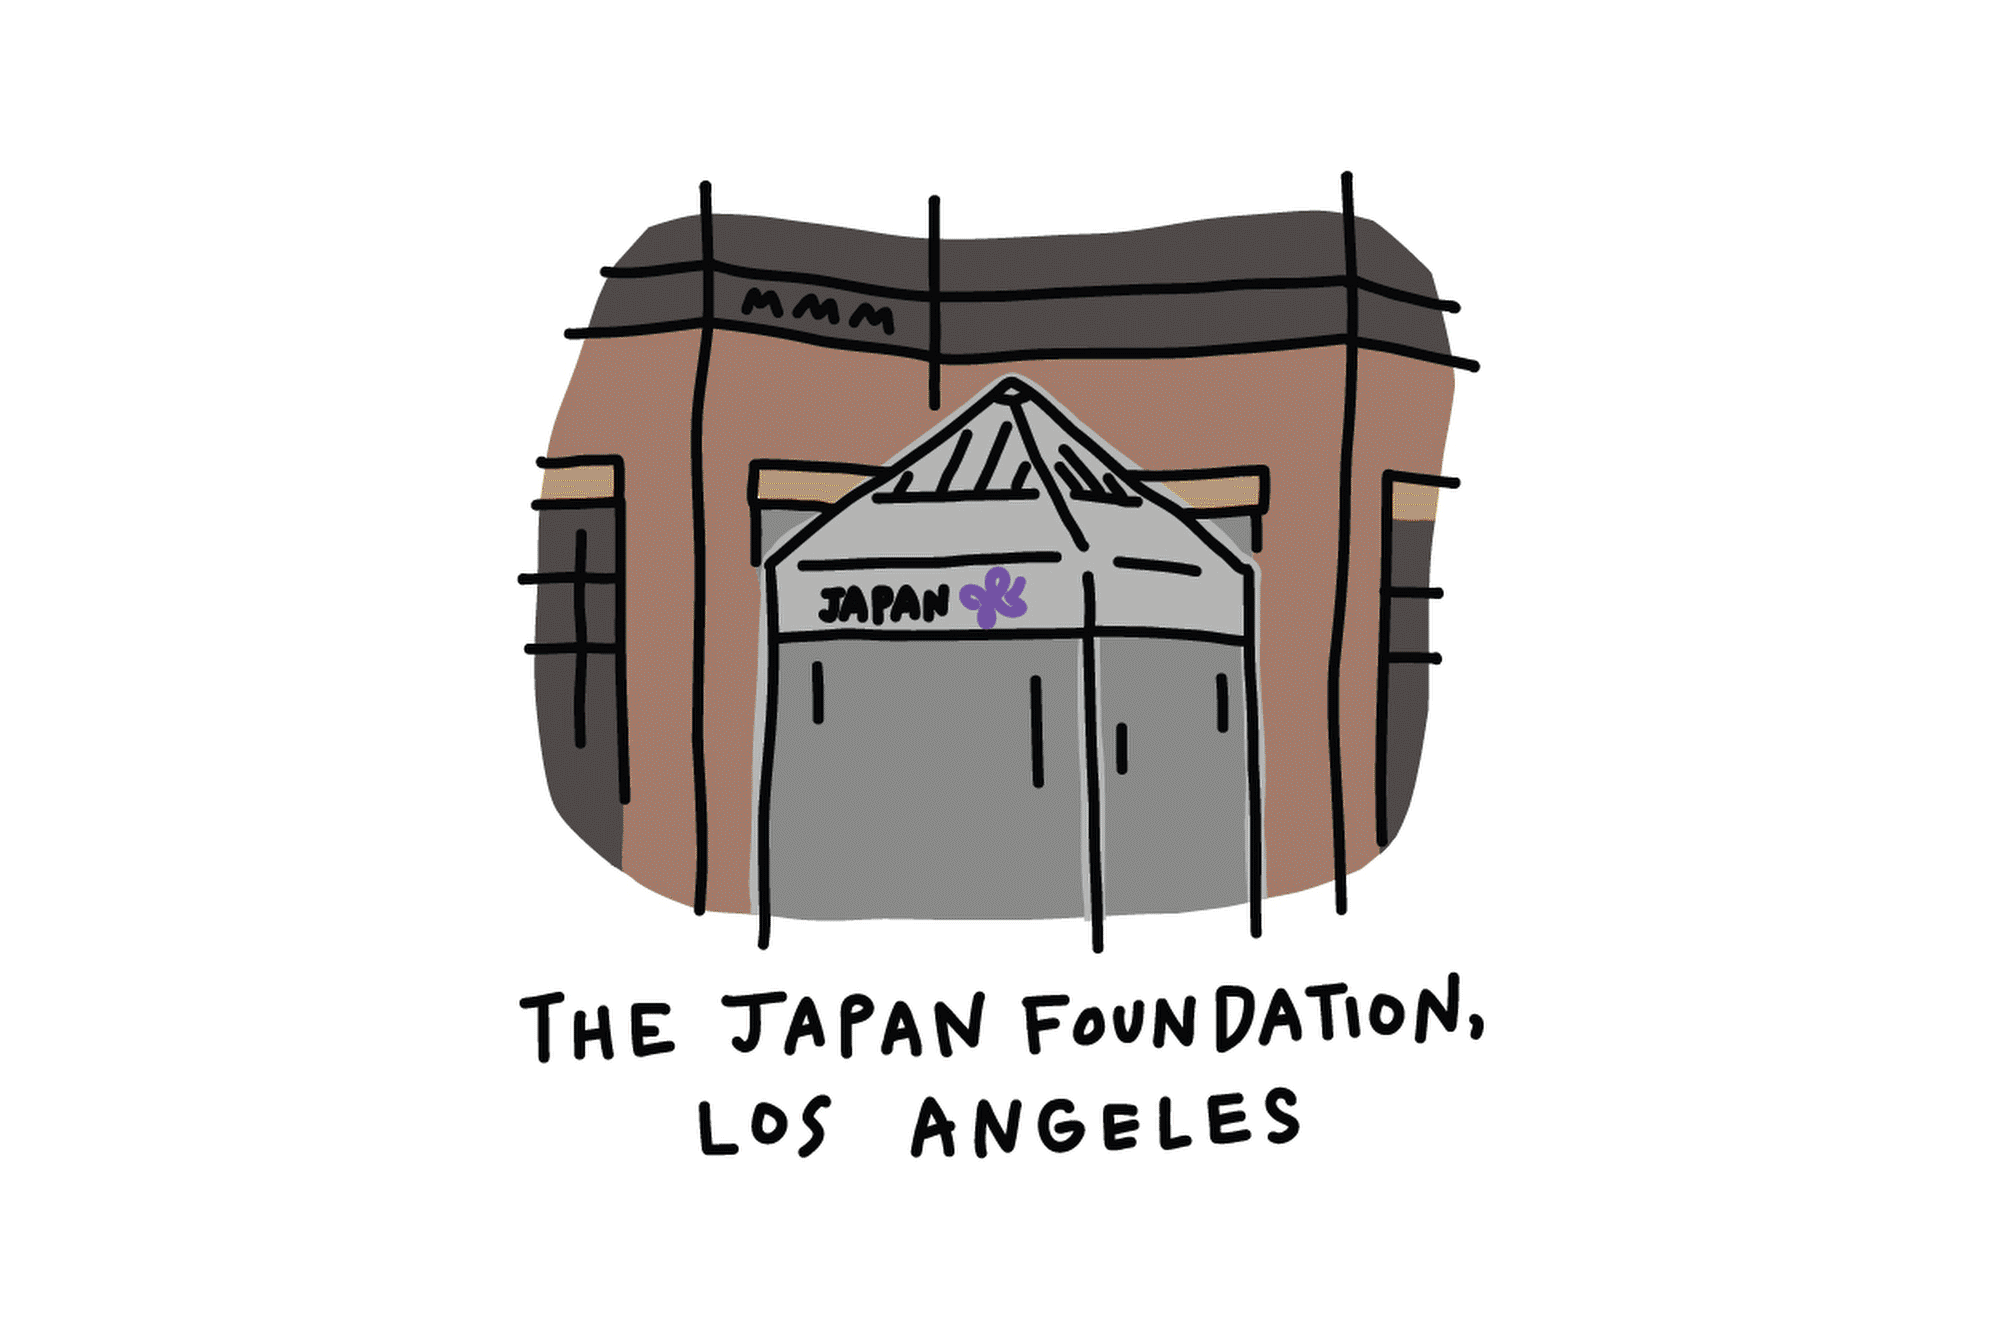 A GIF shows illustrations of L.A. attractions including the Tar Pits and LACMA. 